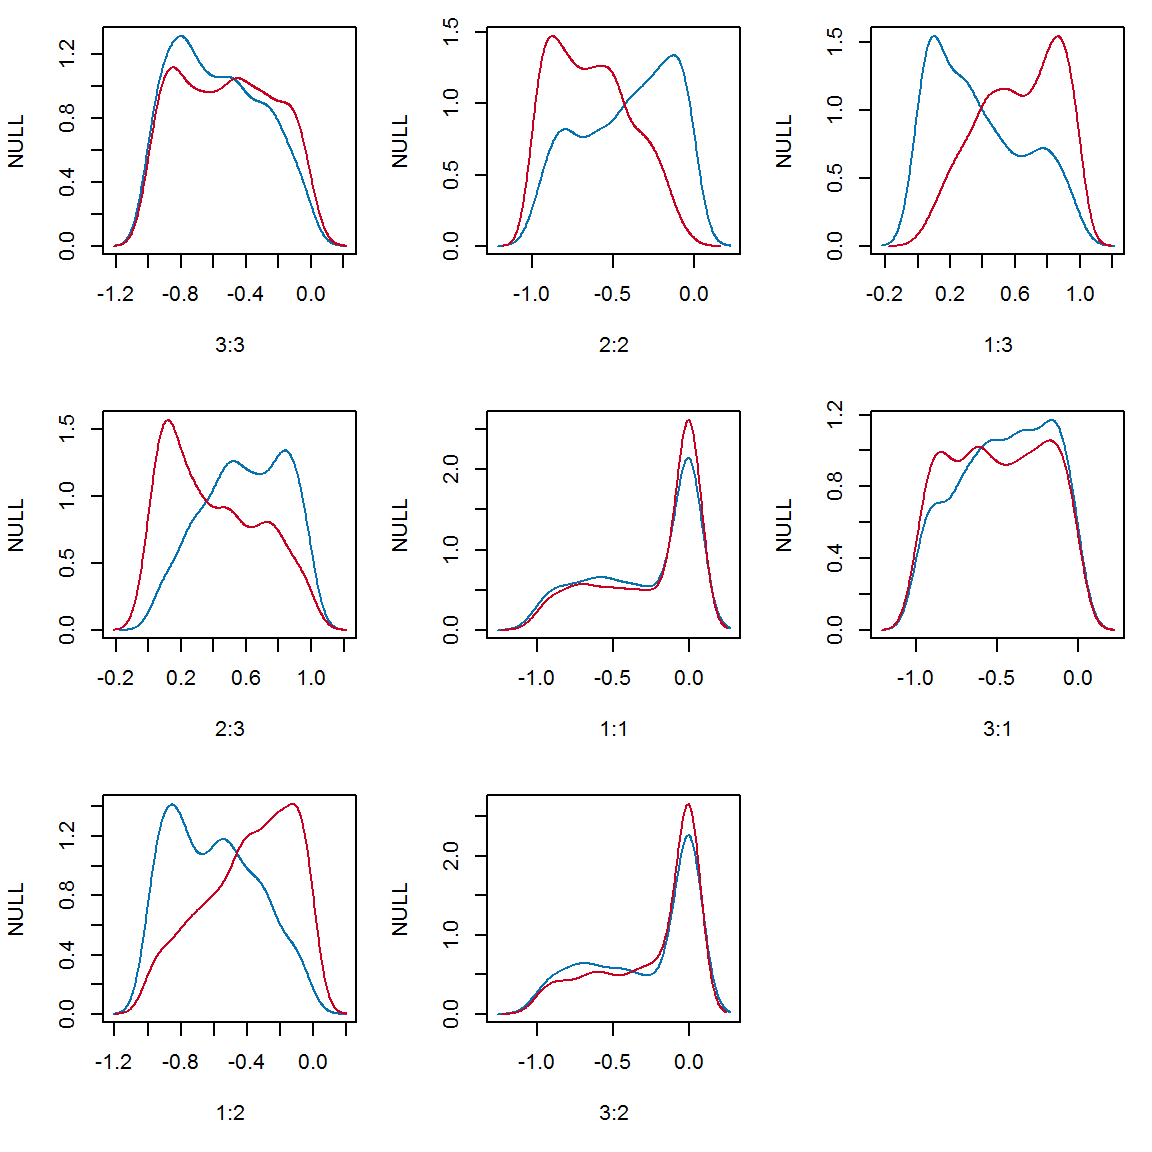 **Figure 2:** Edge weight density plots for a decrease in hares following a positive press perturbation to vegetation in model BCDE. Each plot corresponds to an edge, and shows the distribution of edge weights when hares decrease (blue) and when hares increase (red).